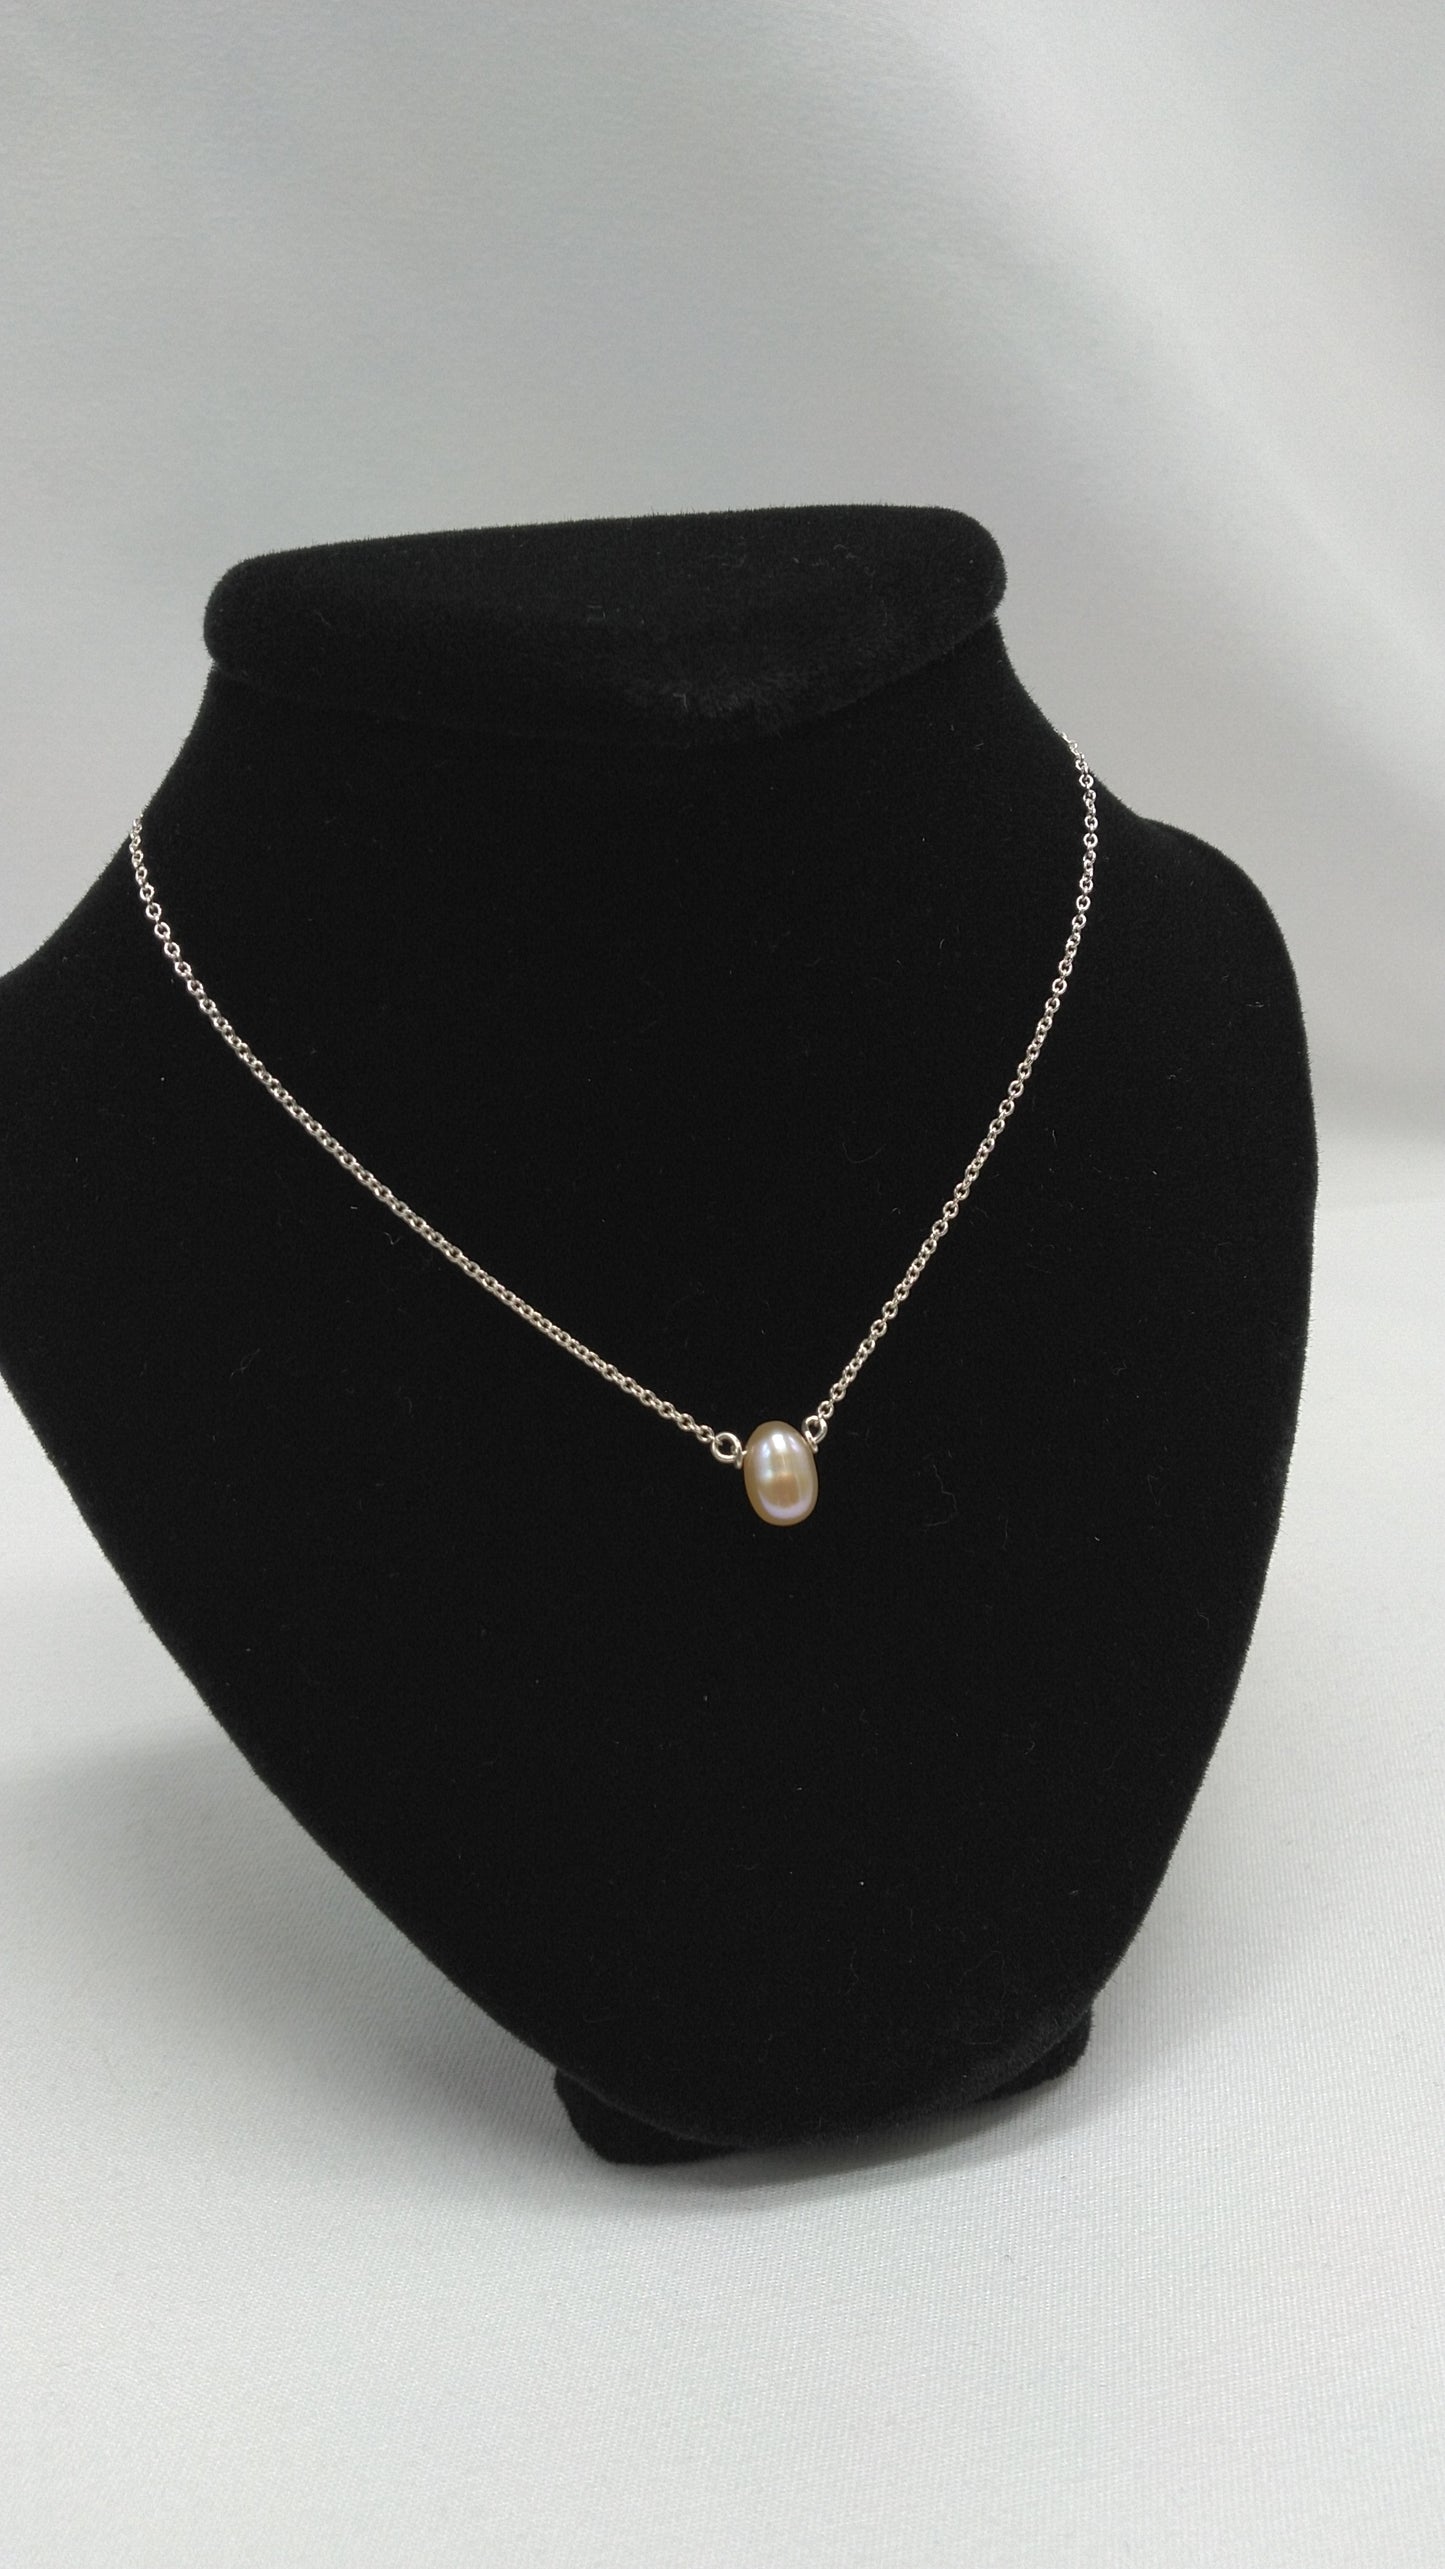 1 Pearl Silver Necklace